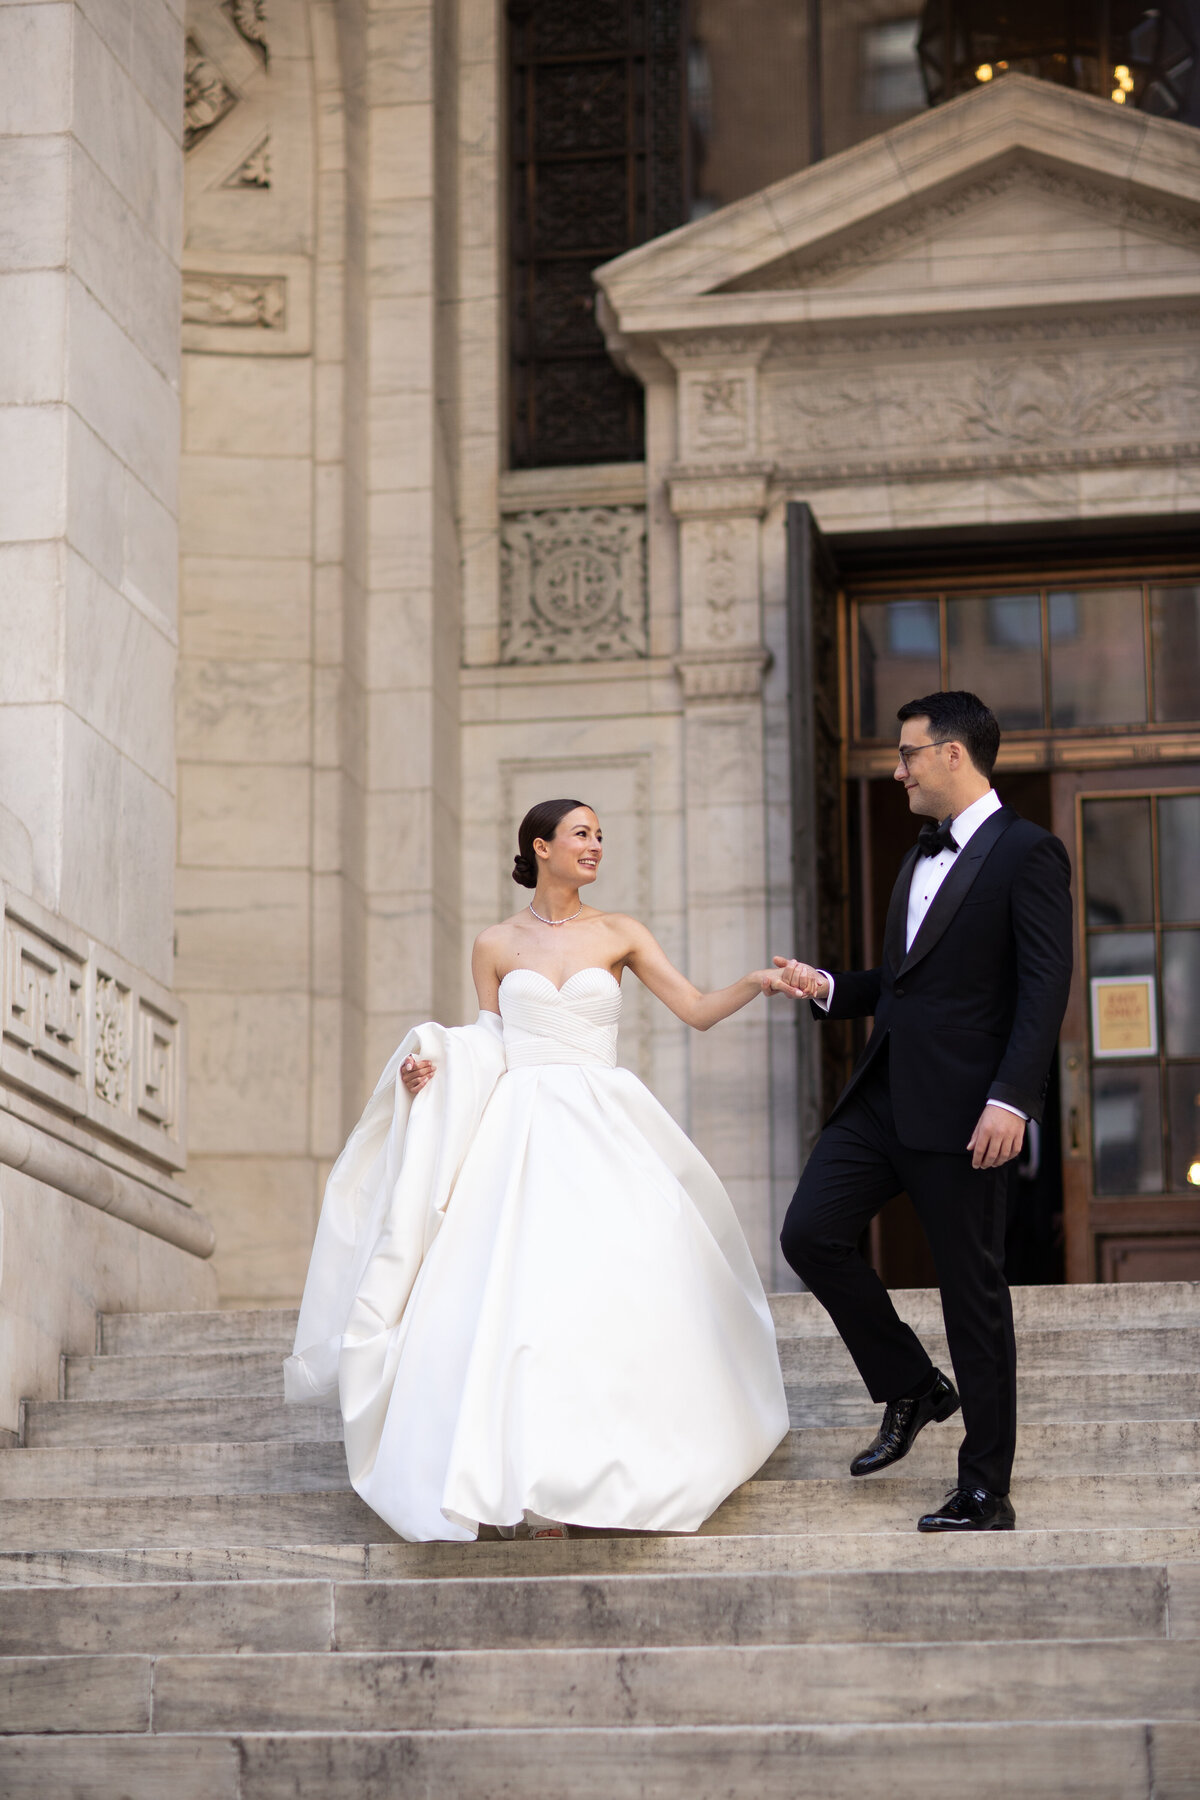 Bride and groom on the steps of NYC public library